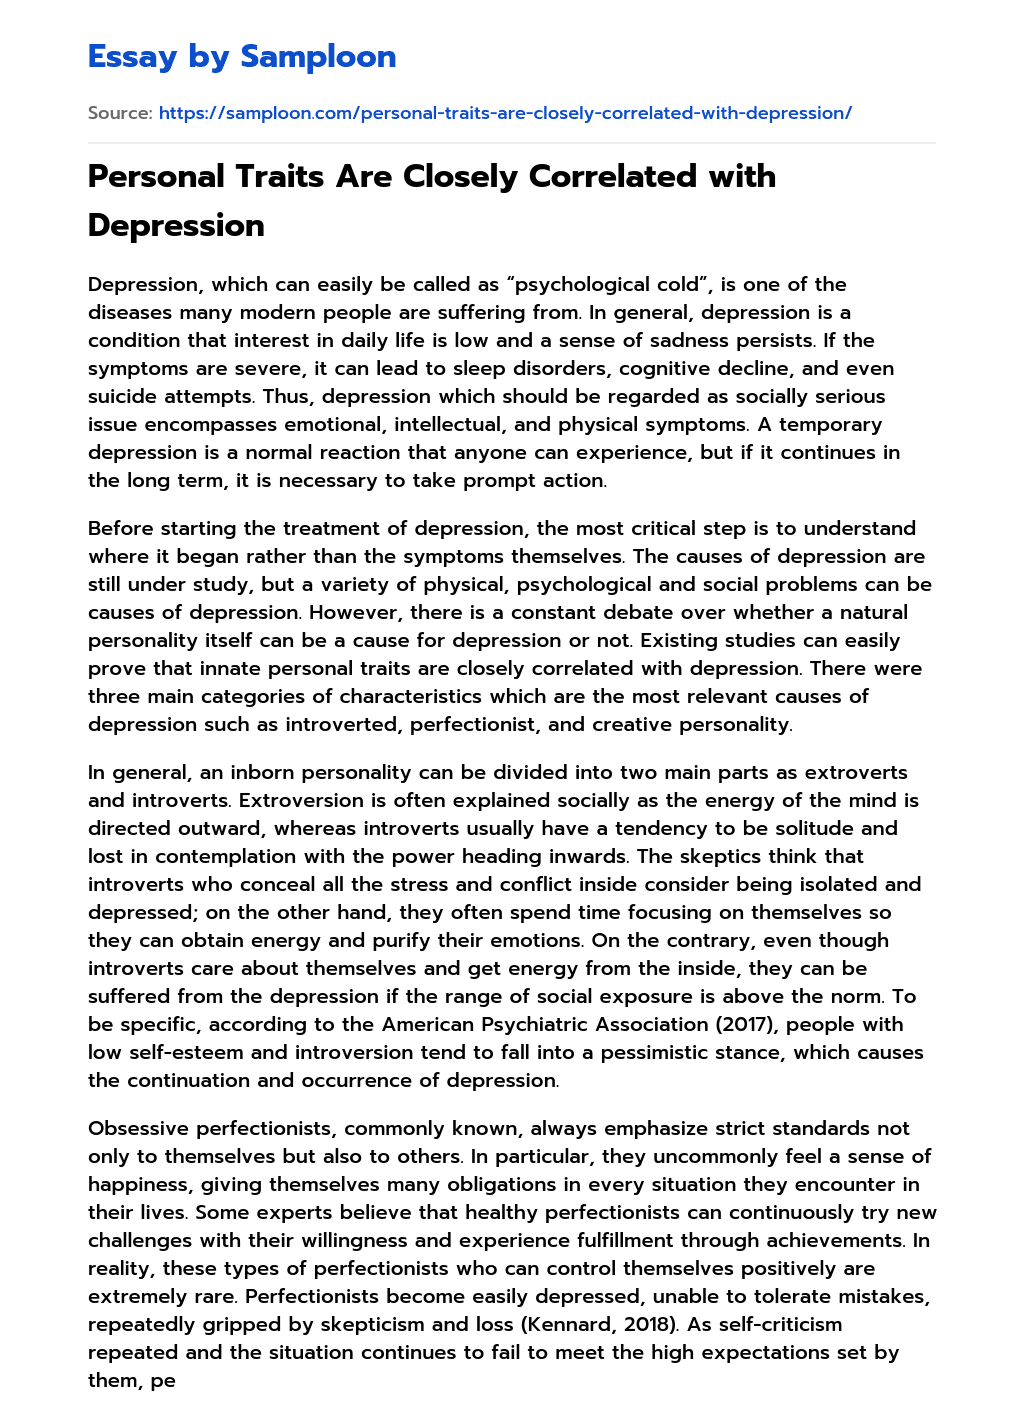 Personal Traits Are Closely Correlated with Depression essay